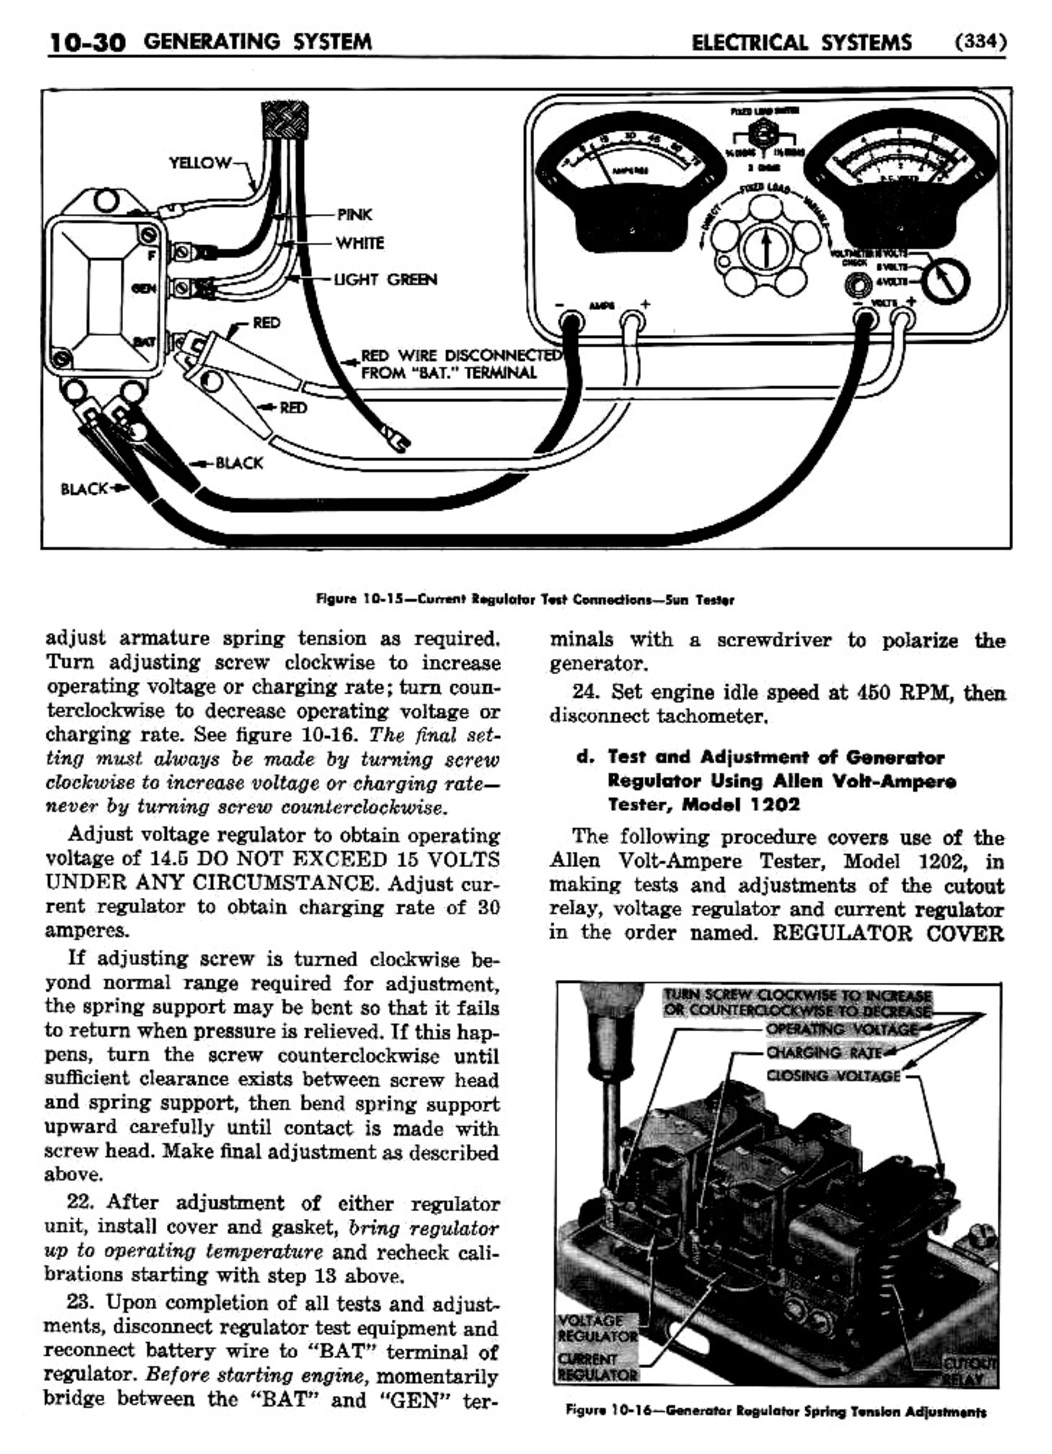 n_11 1955 Buick Shop Manual - Electrical Systems-030-030.jpg